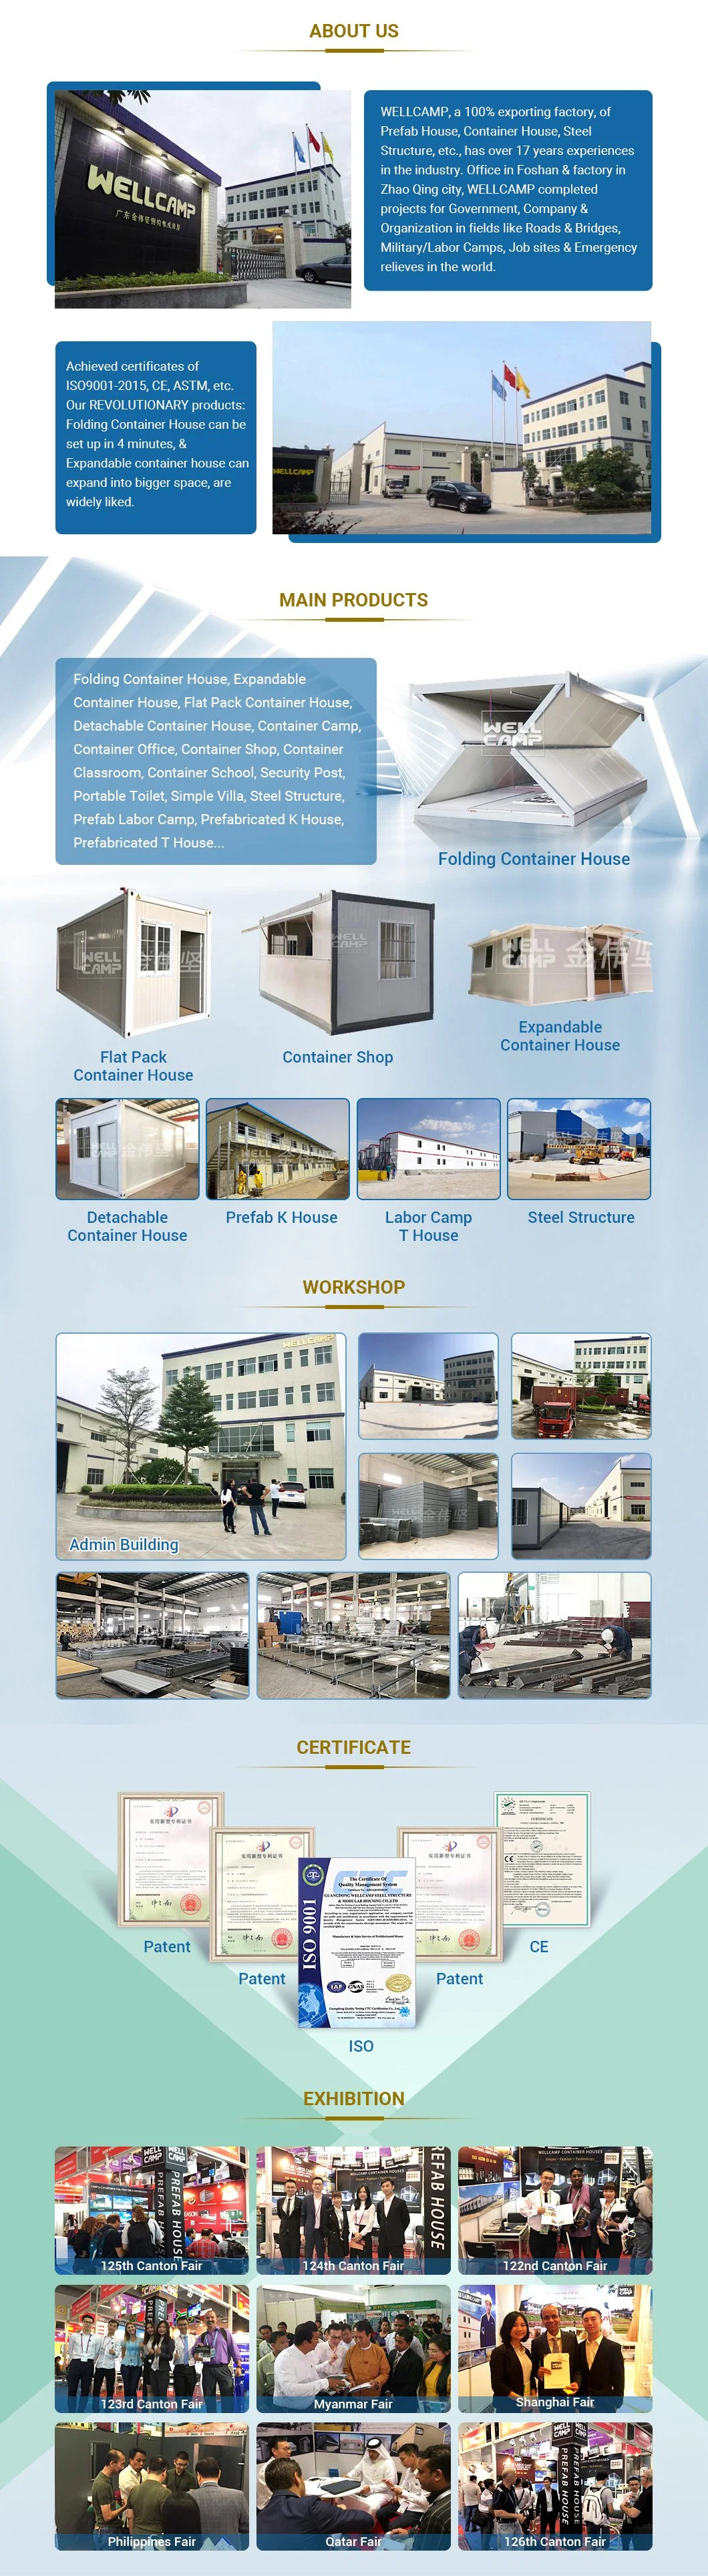 Low Cost 20FT Steel Frame Casas Modular Container House 3 Bedroom Sandwich Panel Detachable Container for Office Accommodation